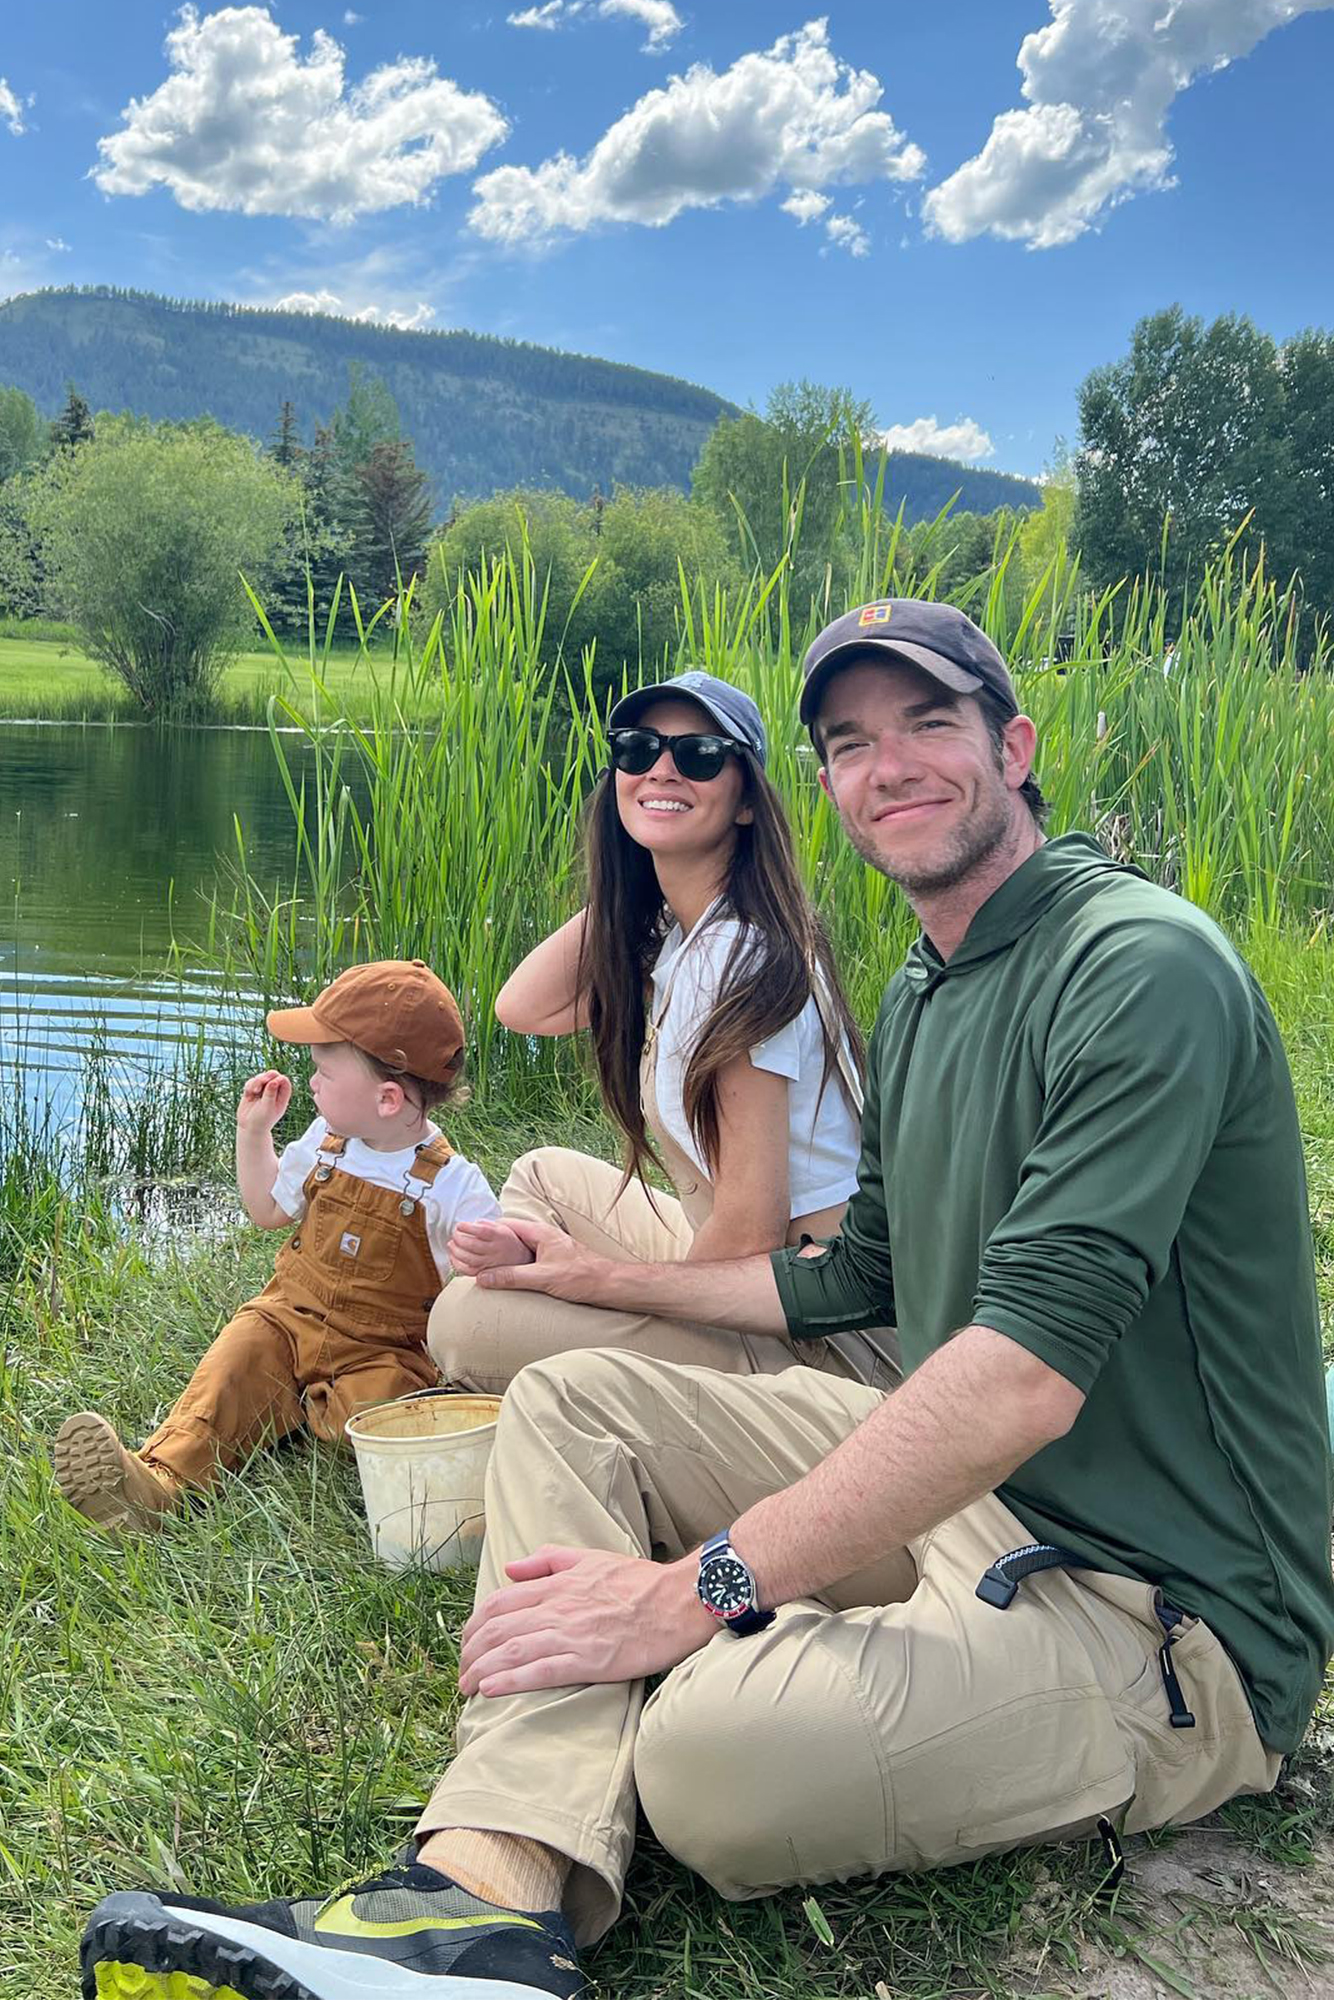 OVER THE MUNN: Olivia Munn and John Mulaney prove the notion that the Northwest is best with son Malcolm